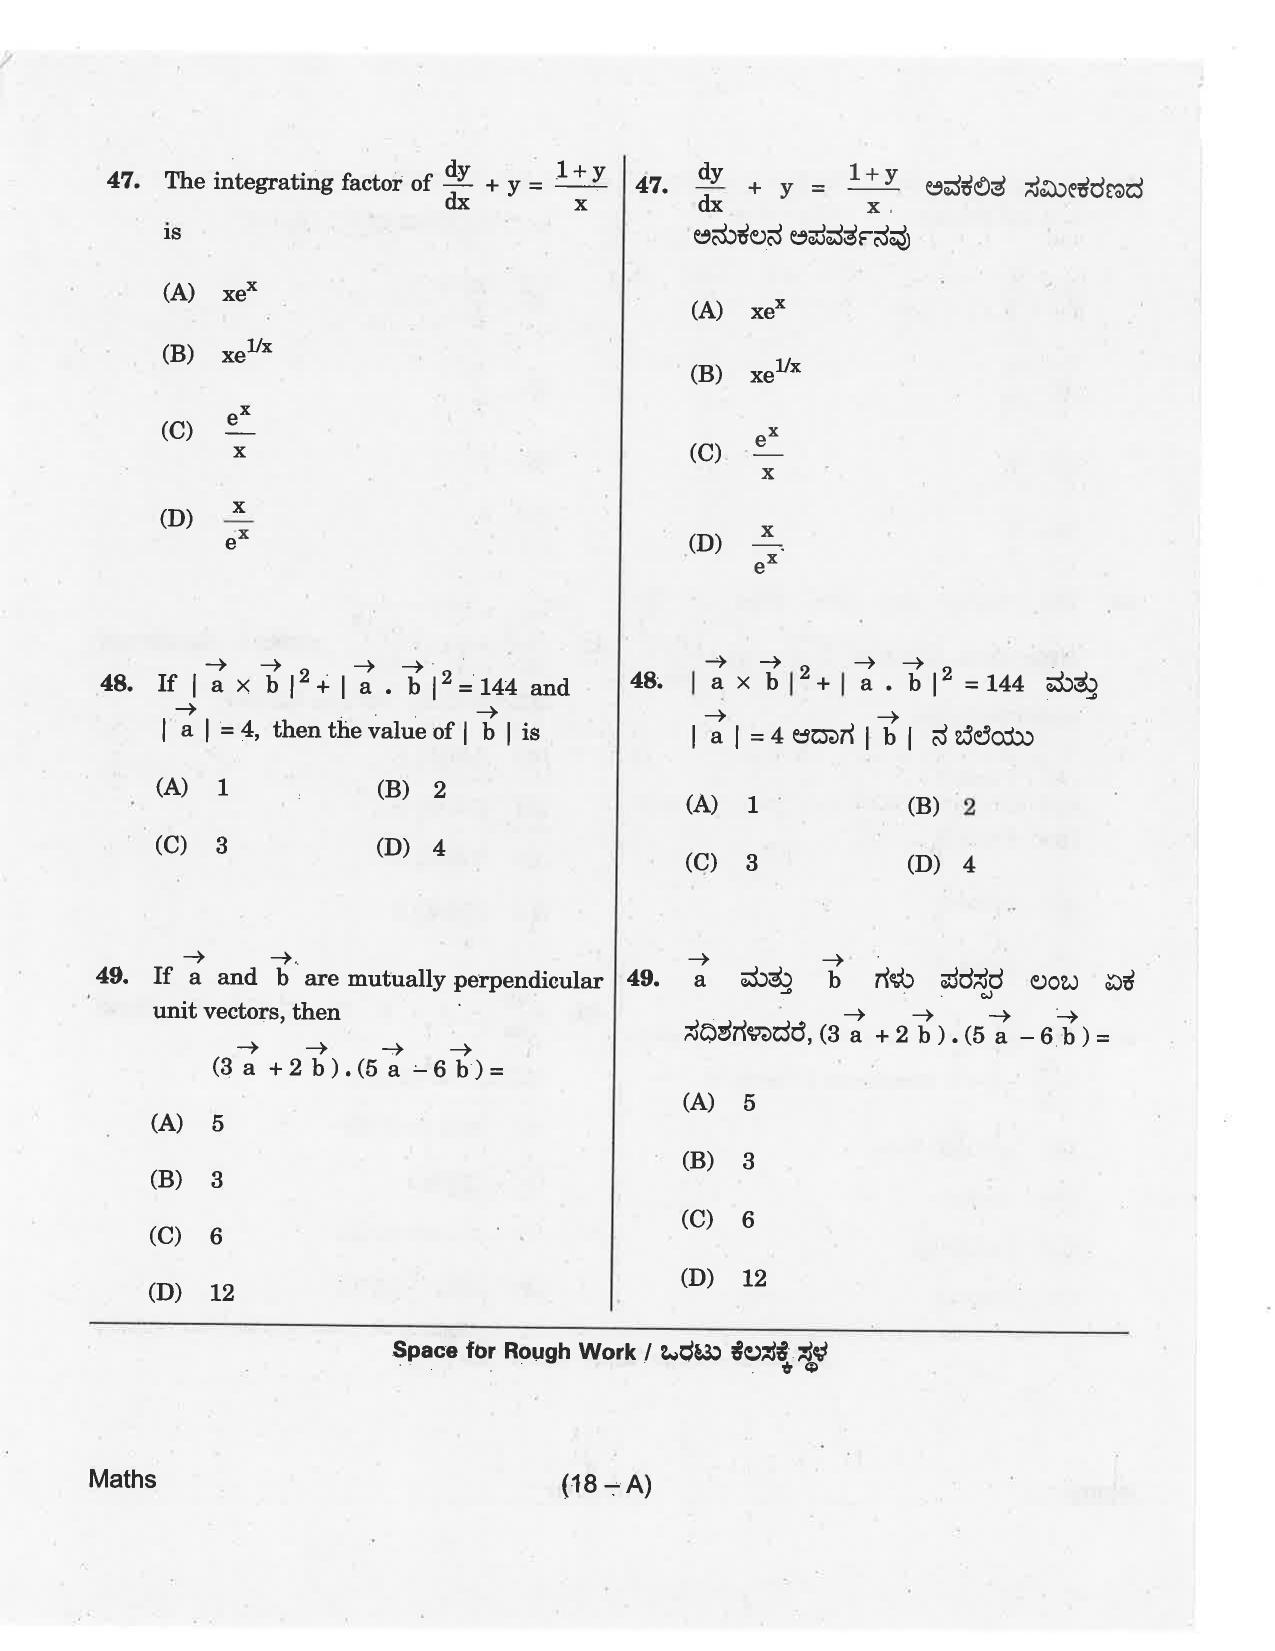 KCET Mathematics 2018 Question Papers - Page 18